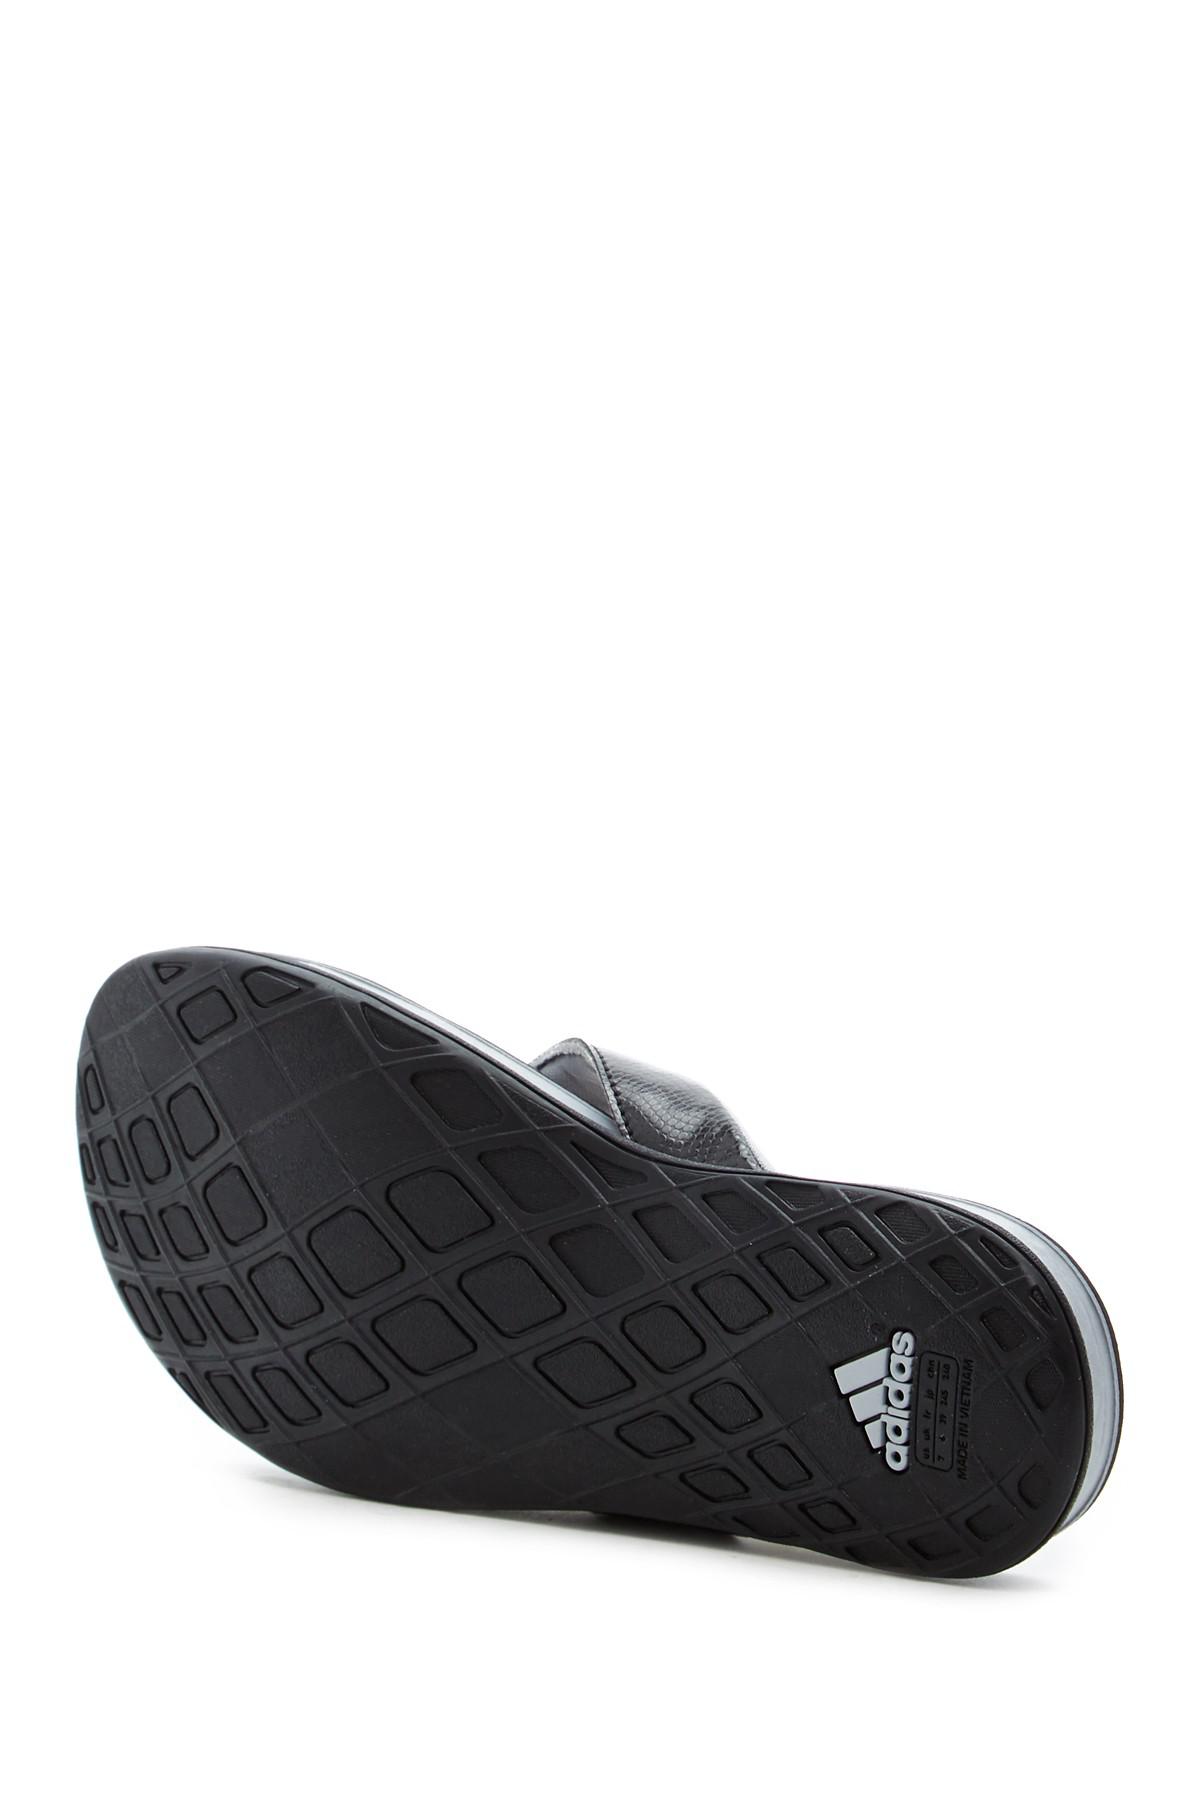 adidas Thong Flip Flop for Lyst